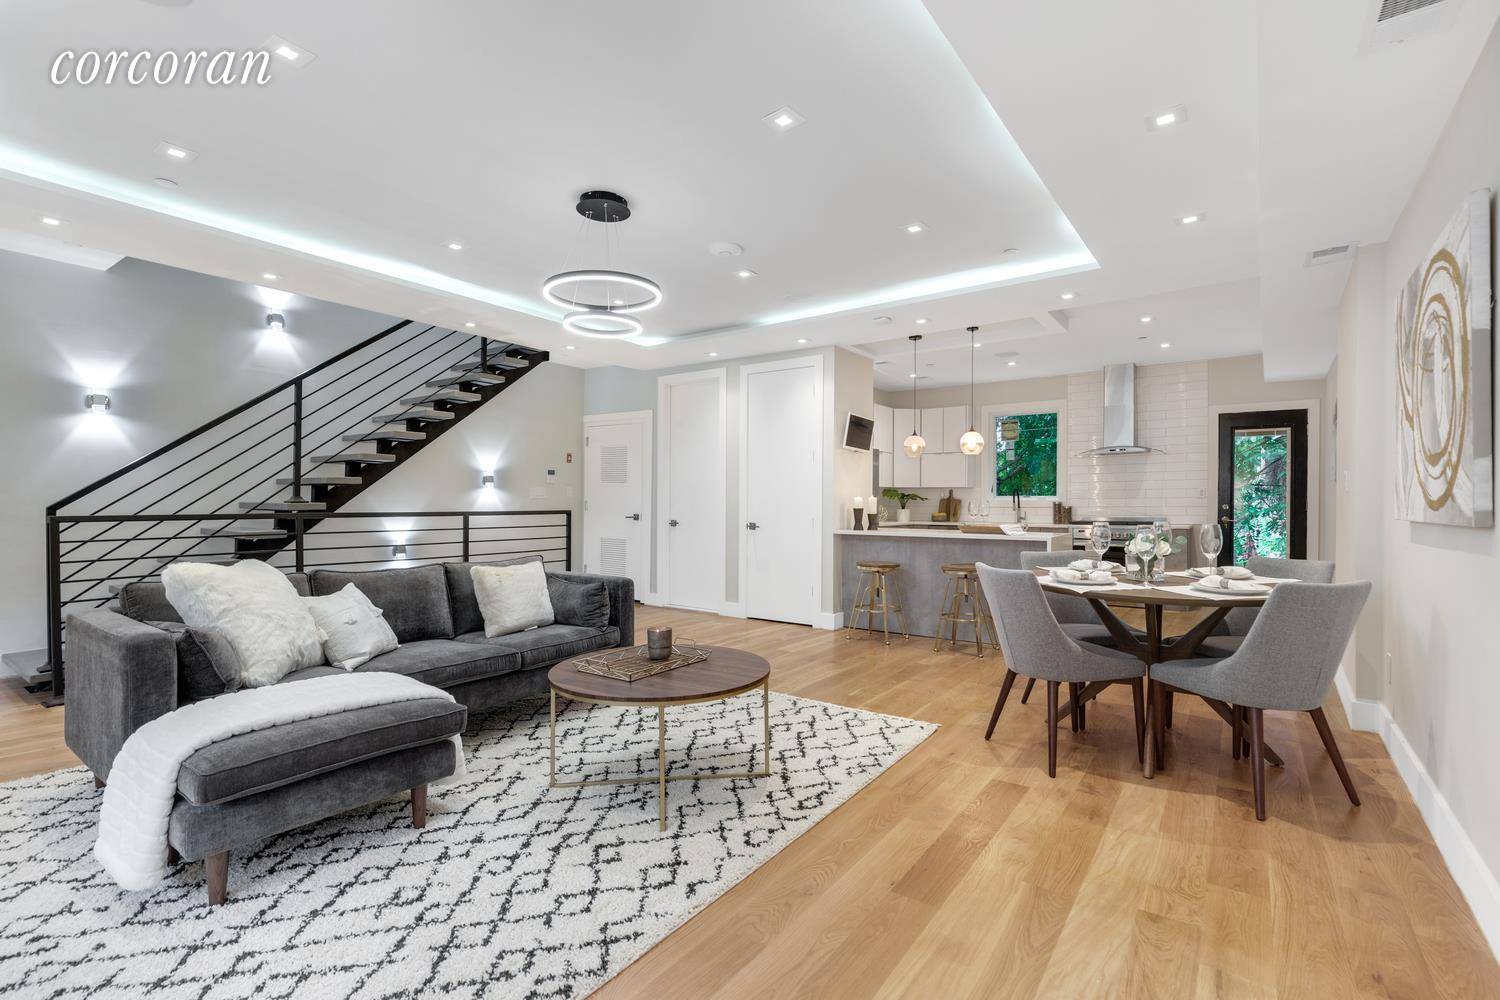 SERENITY 280 Patchen Ave, 2 BEDFORD STUYVESANT Live the life youA ve always dreamed of in this sprawling duplex with elegant interiors that evoke a feeling of sophistication and high ...